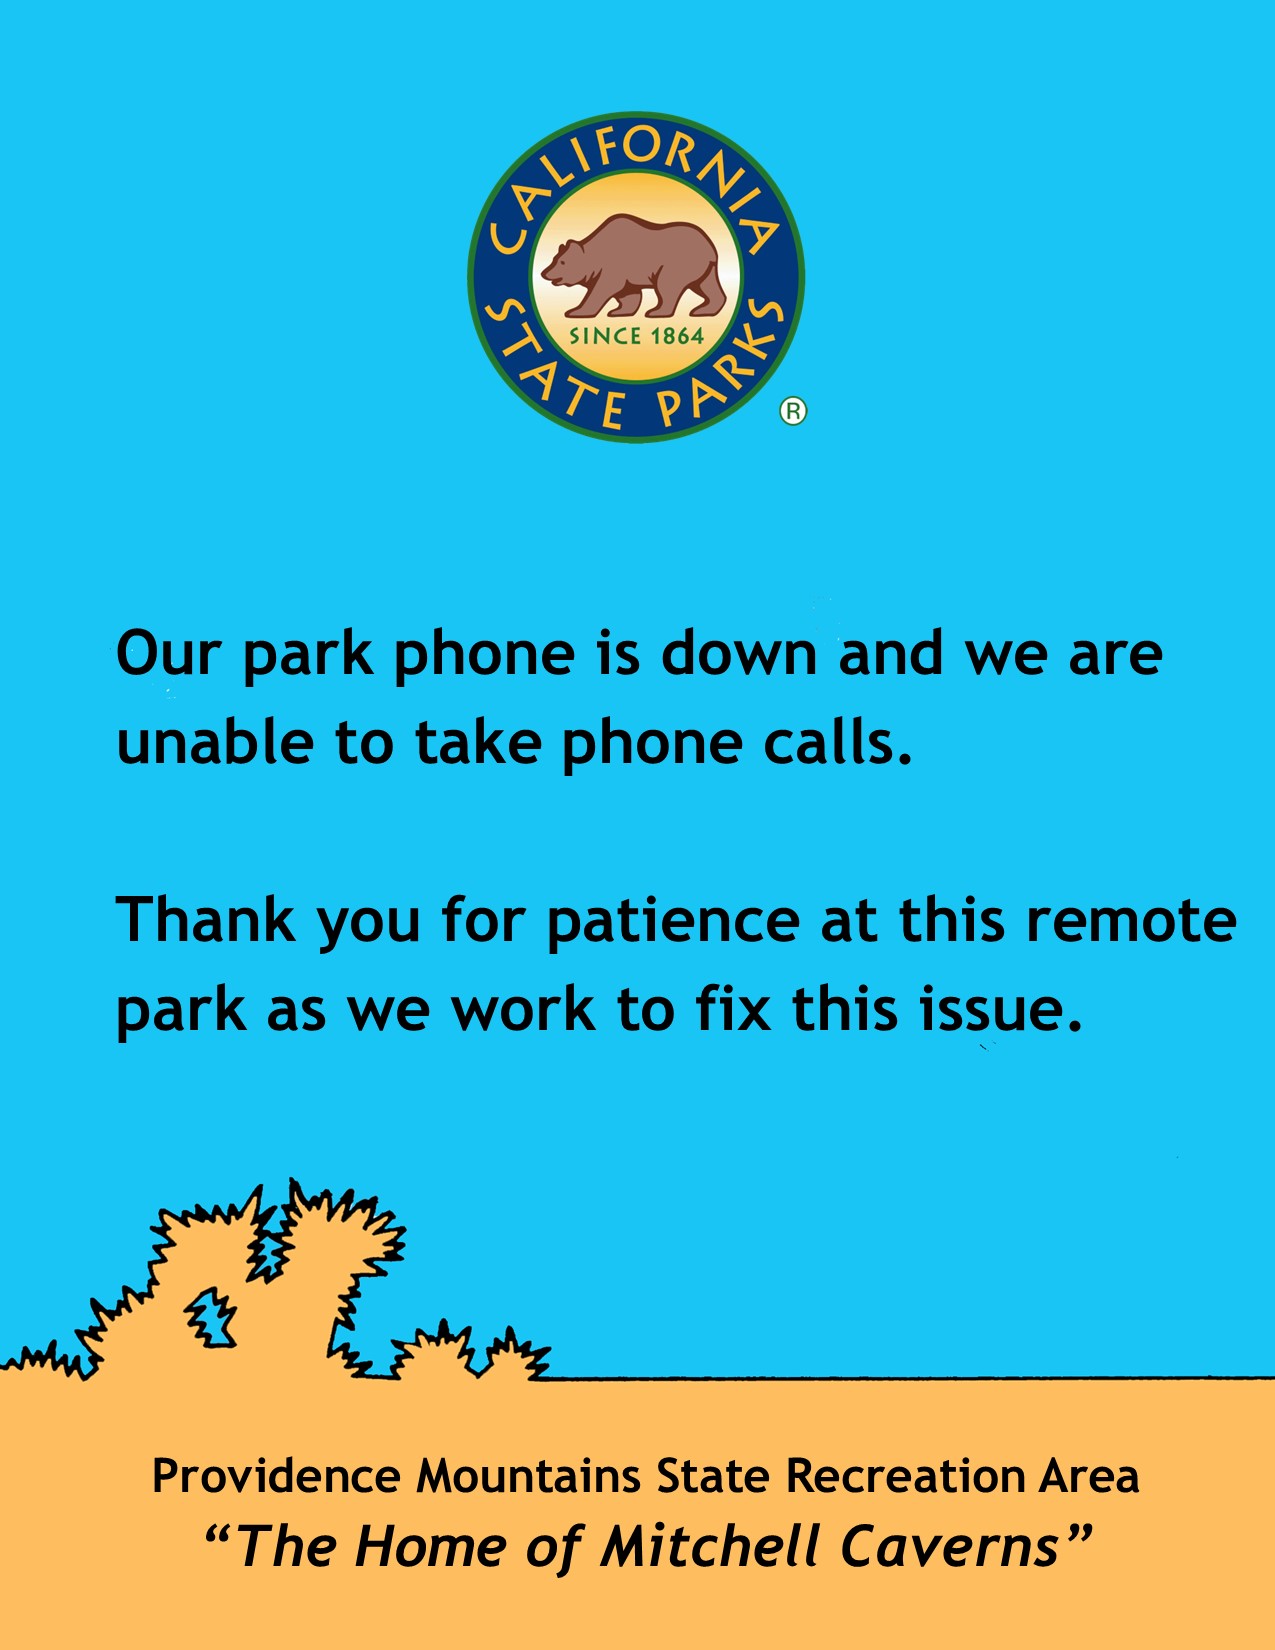 Our park phone is down and we are unable to take phone calls. Thank you for your patience at this remote park as we work to fix this issue.